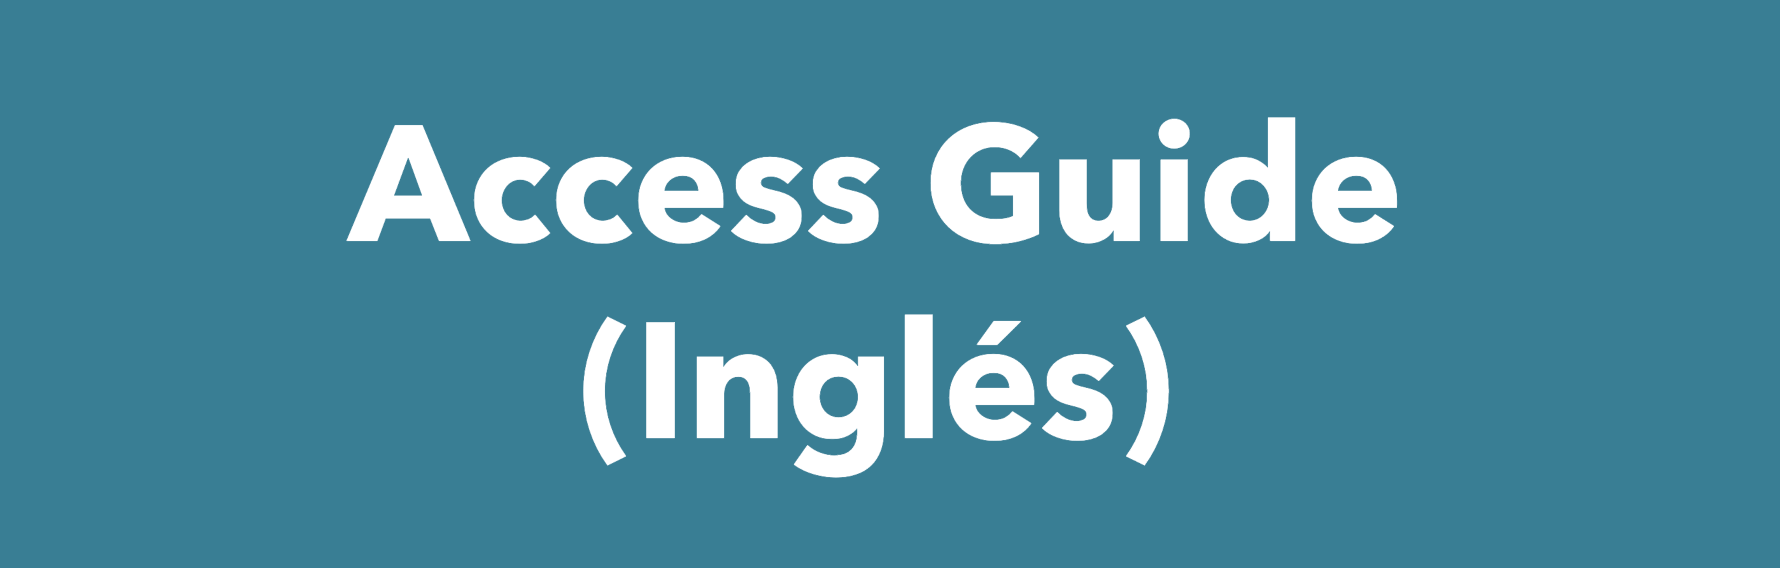 inglesl each other access guide